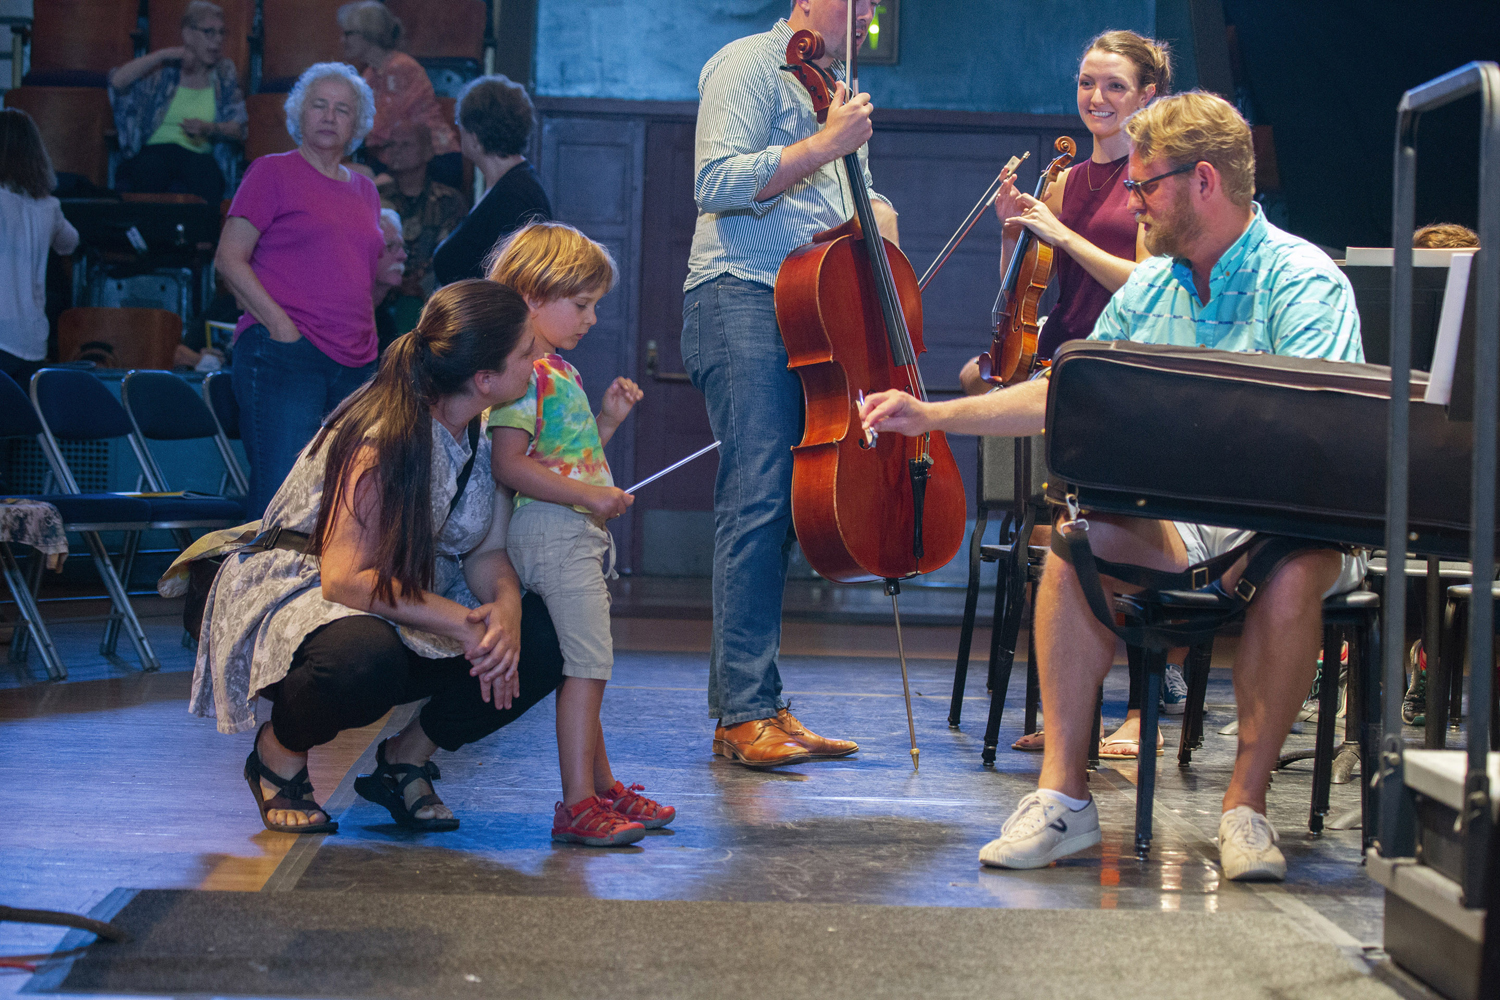 Concertmaster Justin Bruns demonstrates bow technique to a young open rehearsal attendee.